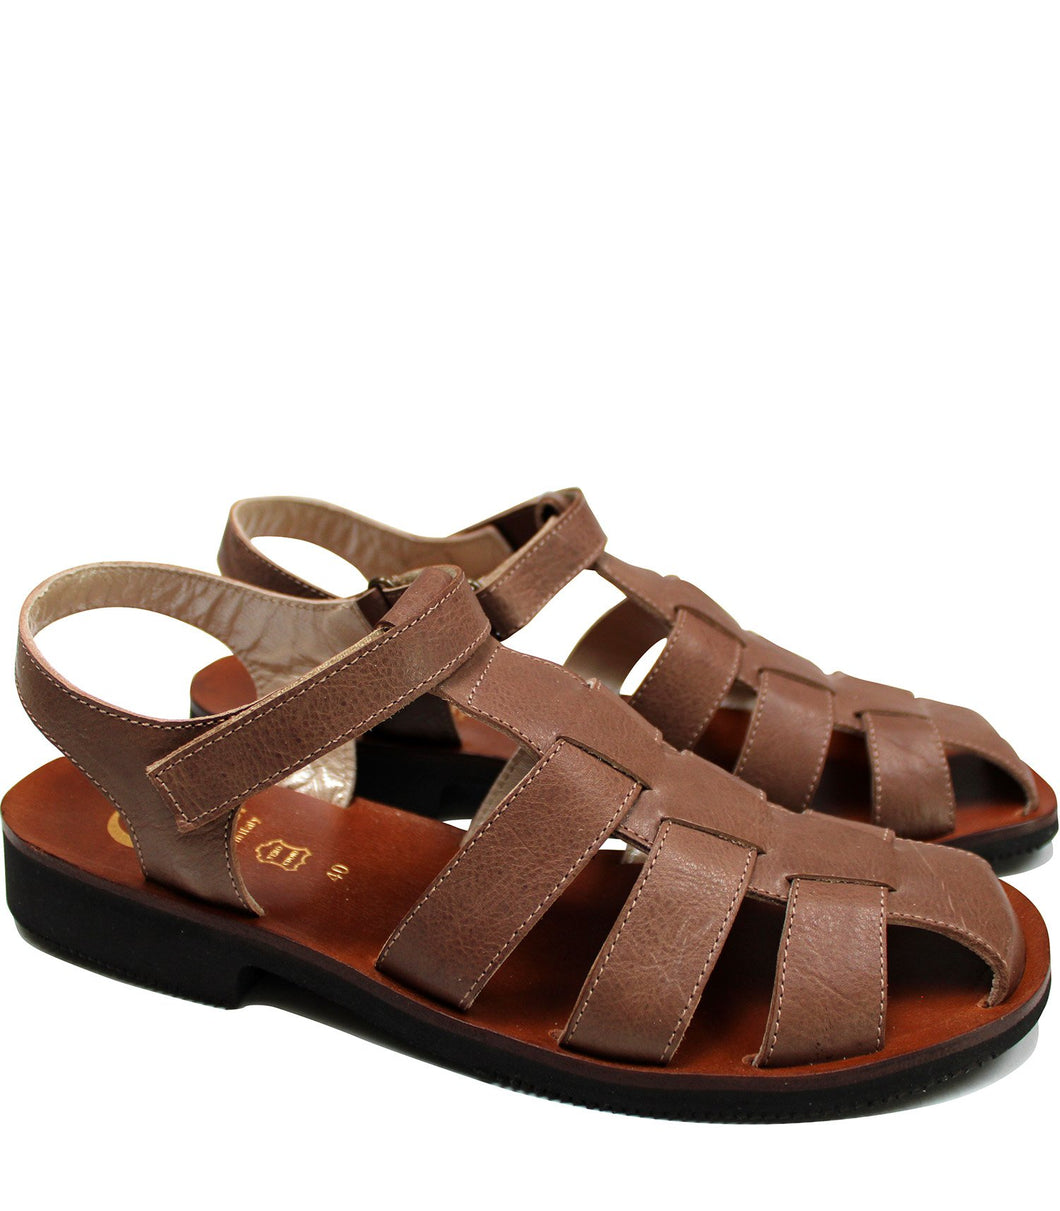 Straps sandals in brown leather